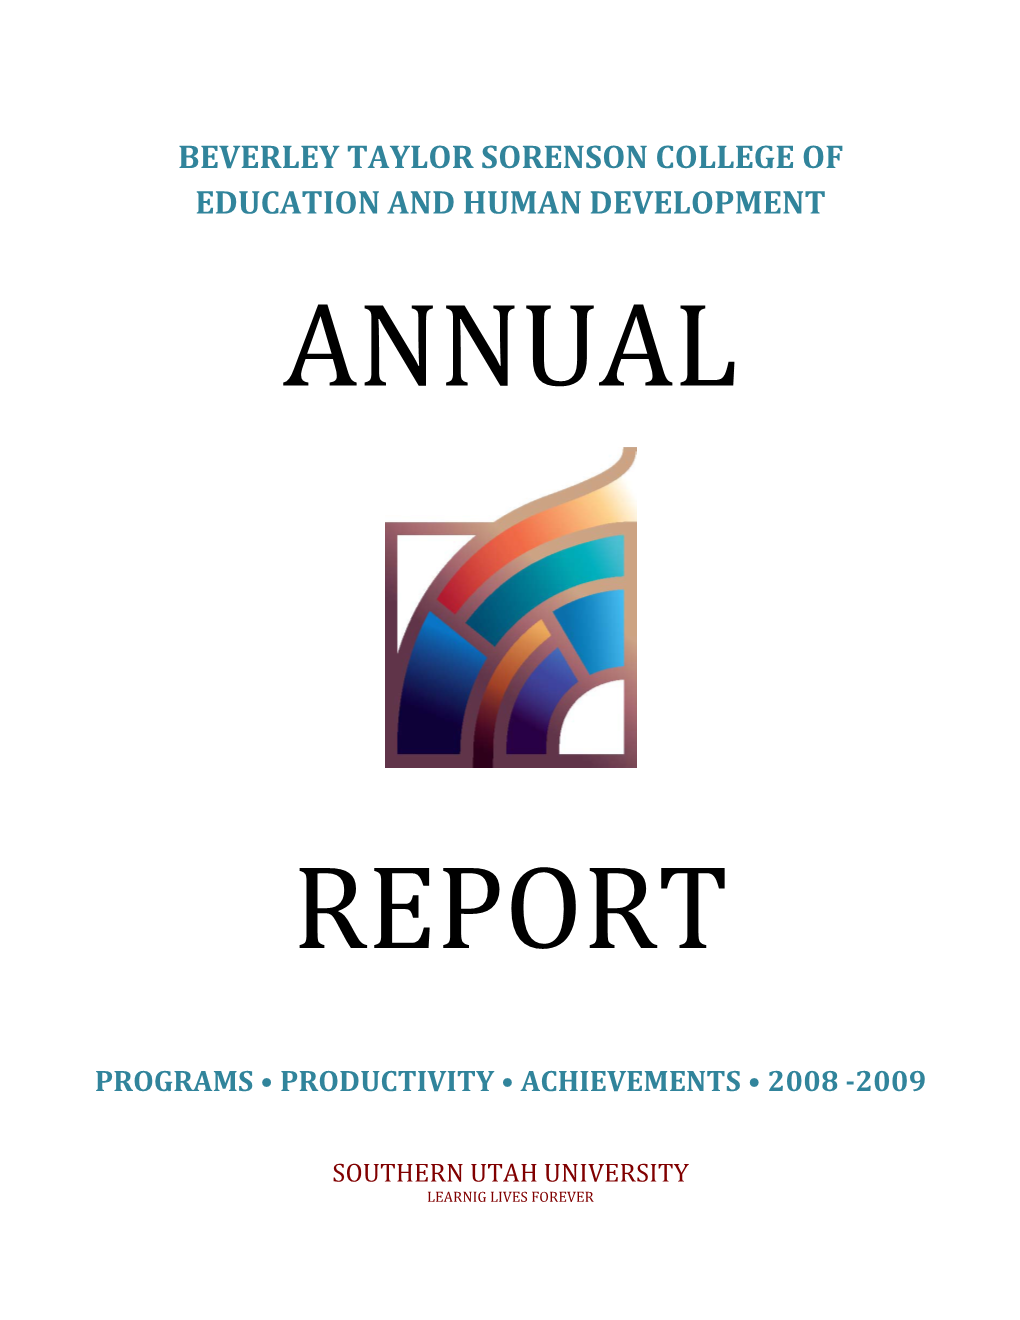 Beverley Taylor Sorenson College of Education and Human Development Annual